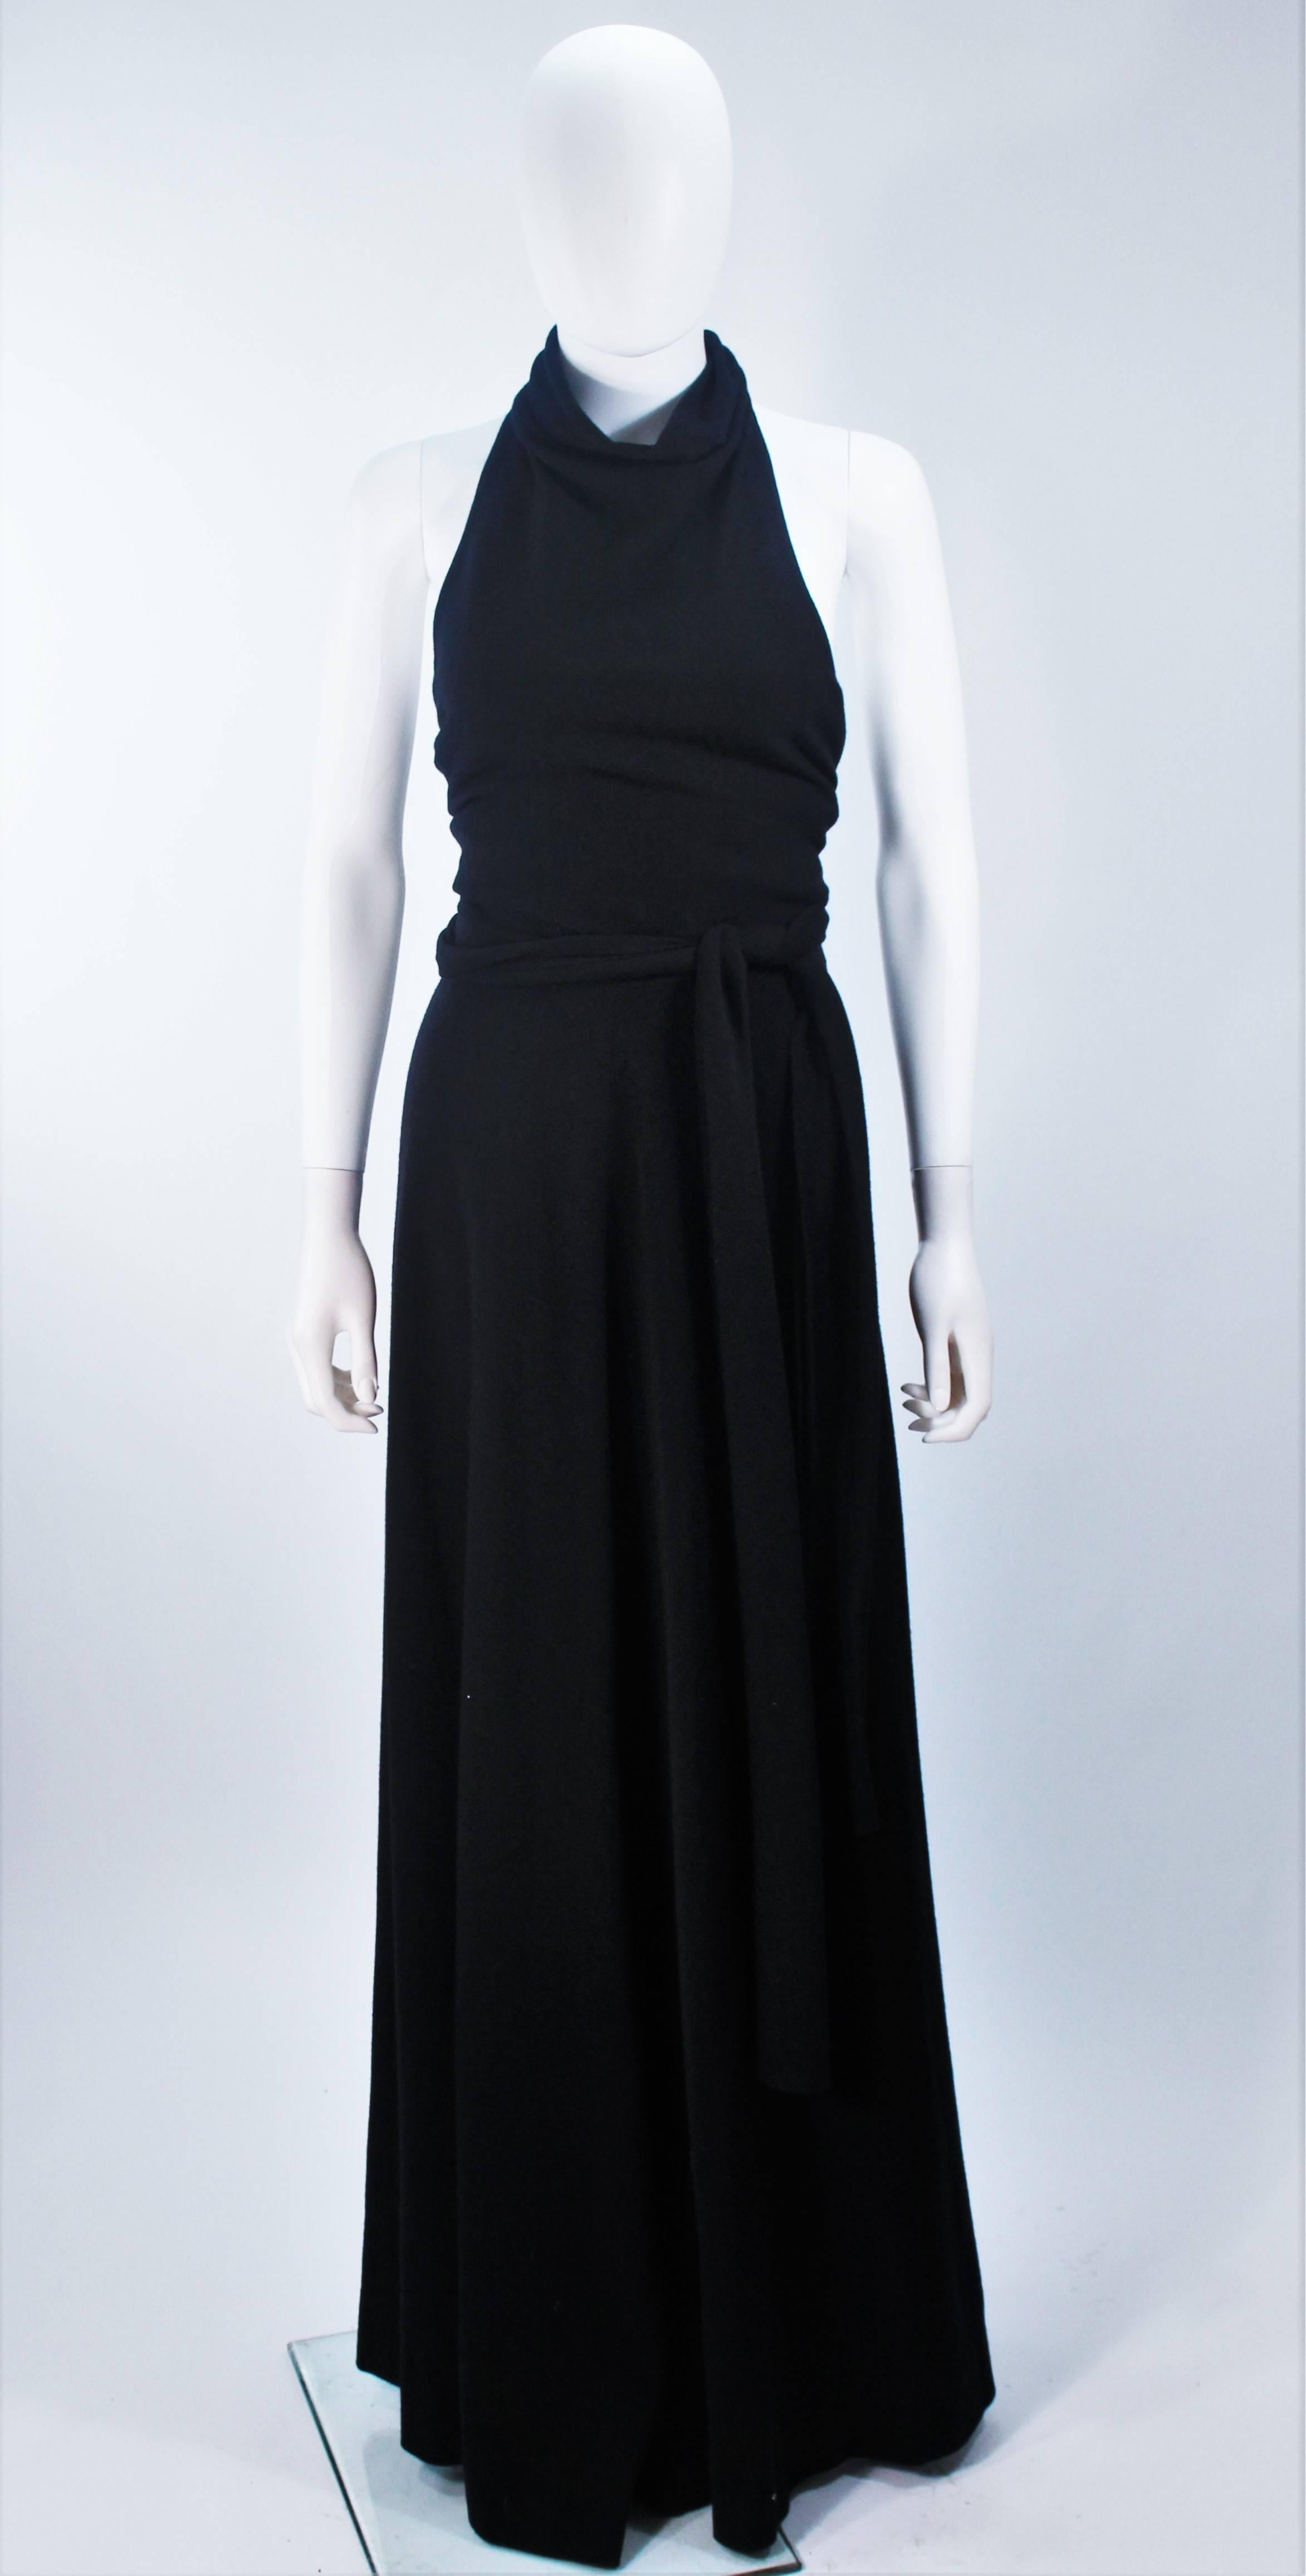  This Jean Patou  dress is composed of a light weight black wool. Features a draped halter style neck with open back, and waist tie. There is a zipper closure. In excellent vintage condition.

  **Please cross-reference measurements for personal